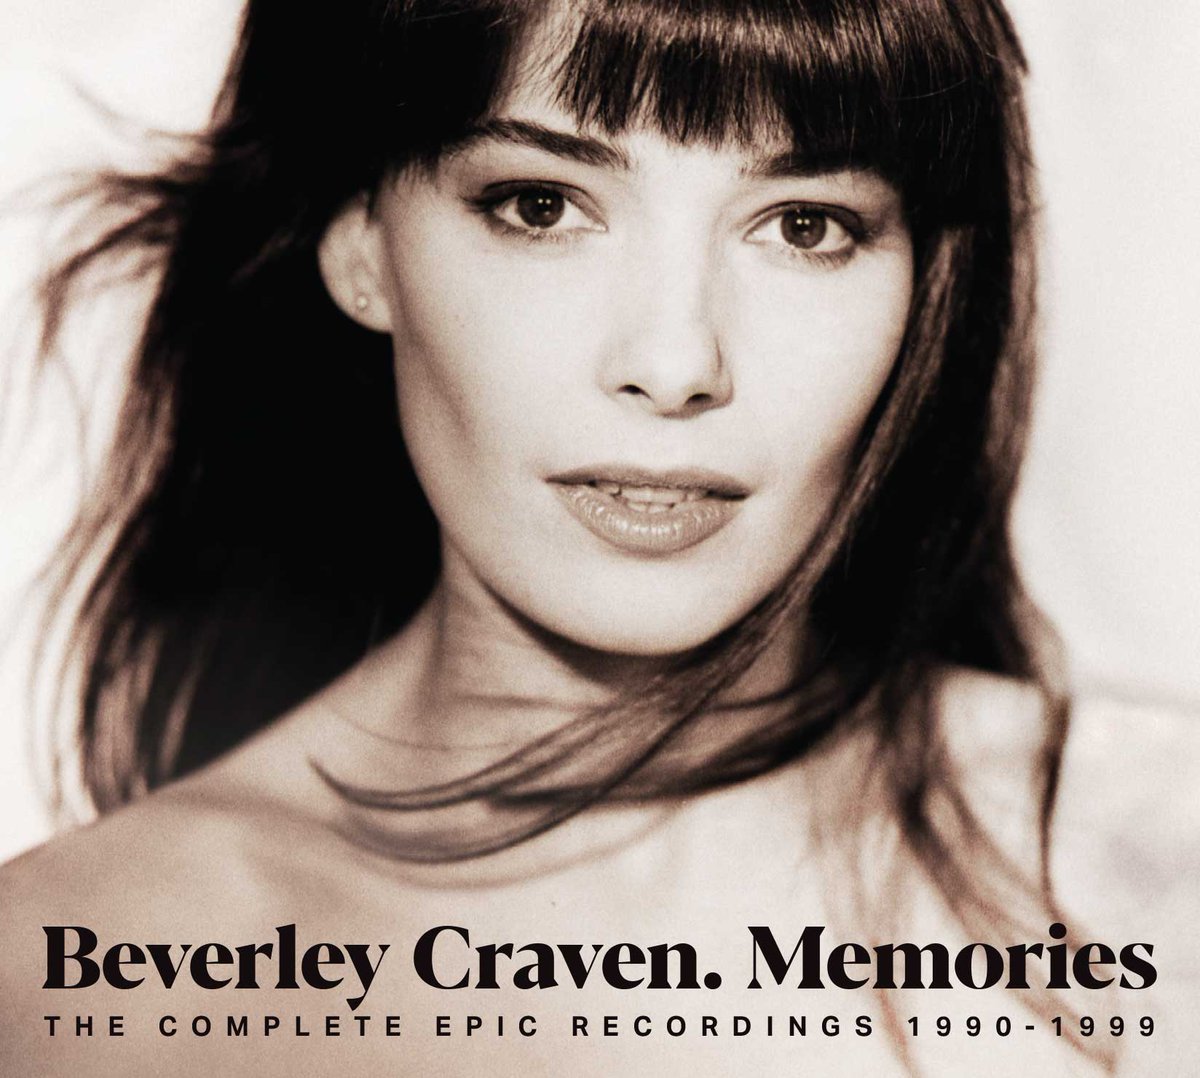 Extensive 3CD anthology showcasing the Epic Records catalogue of acclaimed singer-songwriter @BeverleyCraven . . . 
Includes 8 bonus tracks, b-sides, alternate versions + live recordings + signed postcard while stocks last!👉cherryred.co/BeverleyCraven…